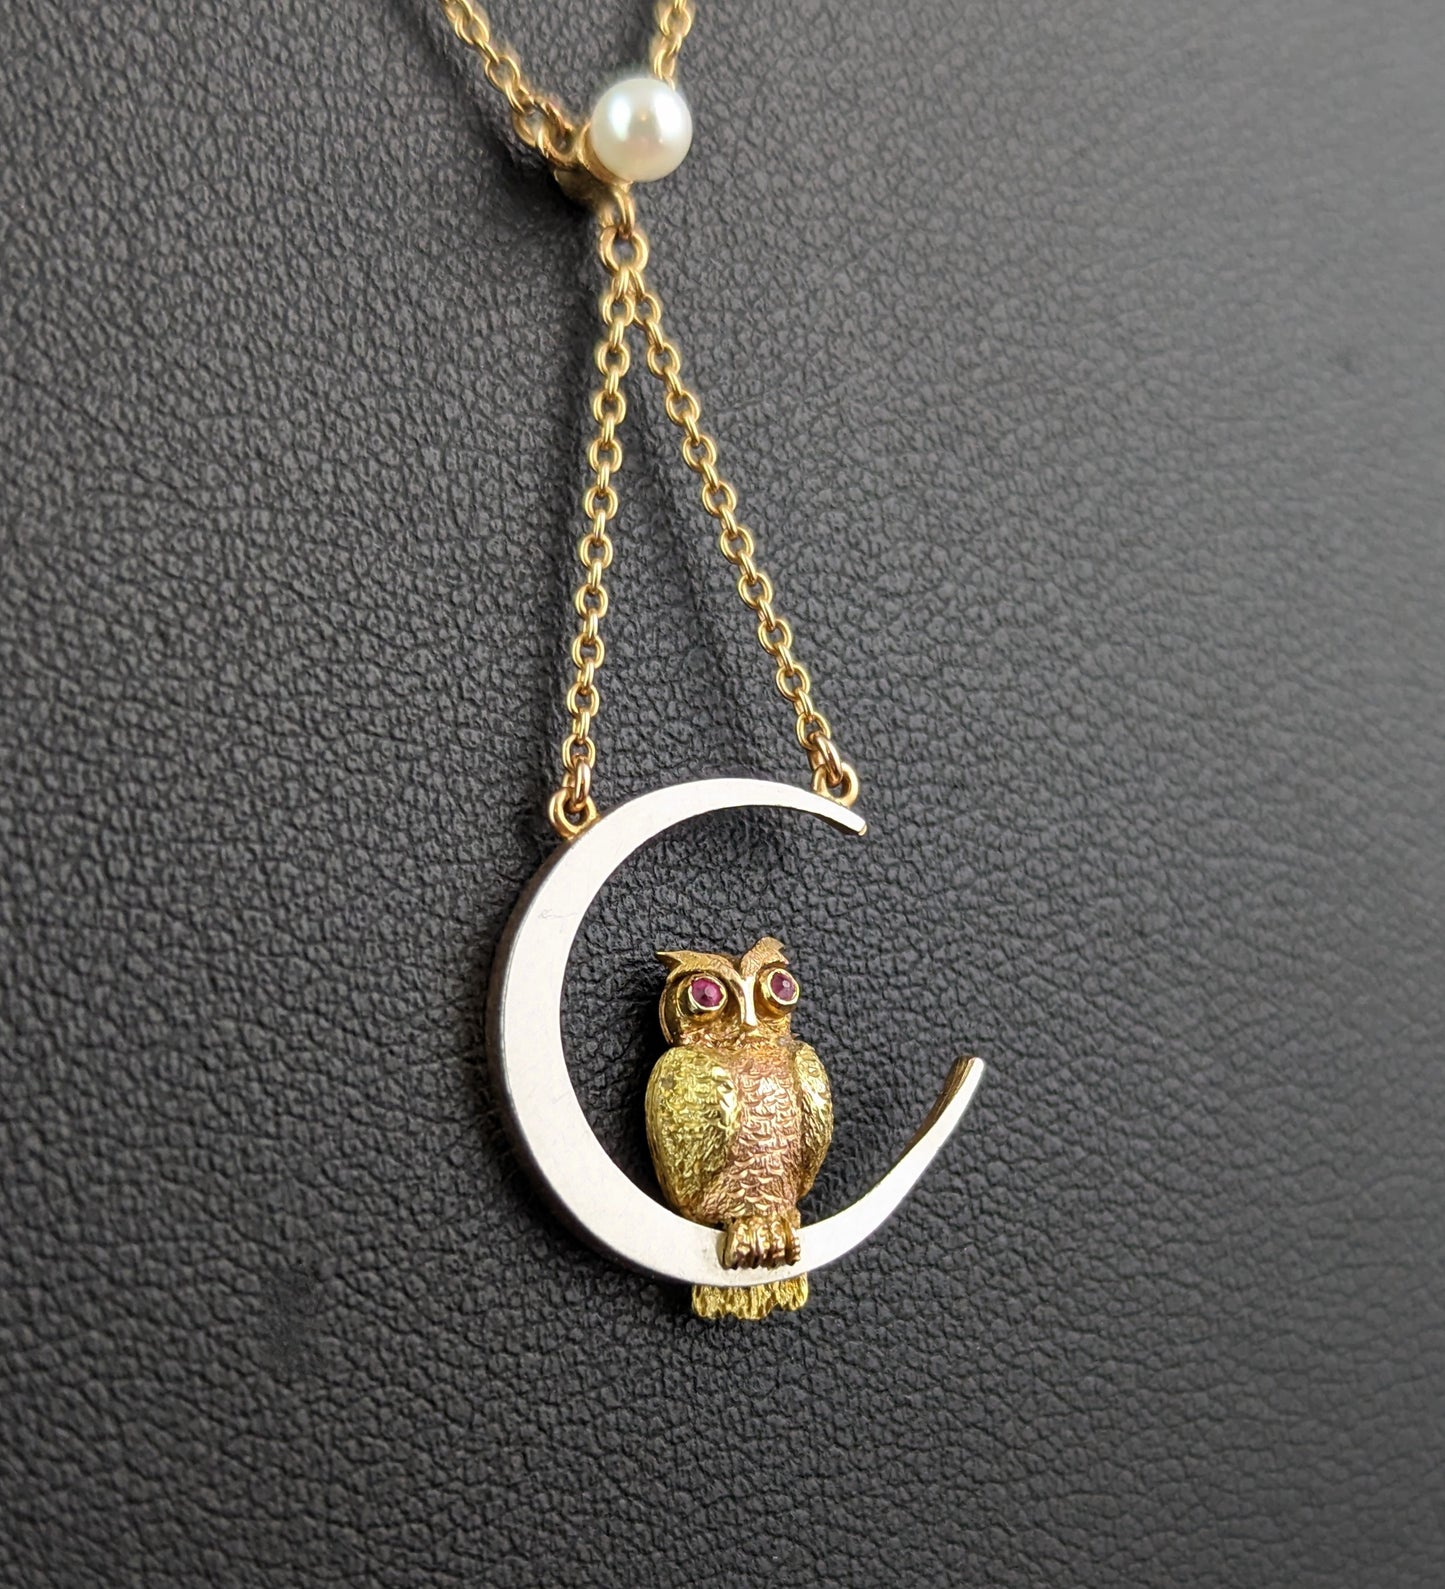 Antique Owl and Crescent moon pendant necklace, 15ct gold and Platinum, Ruby and Pearl